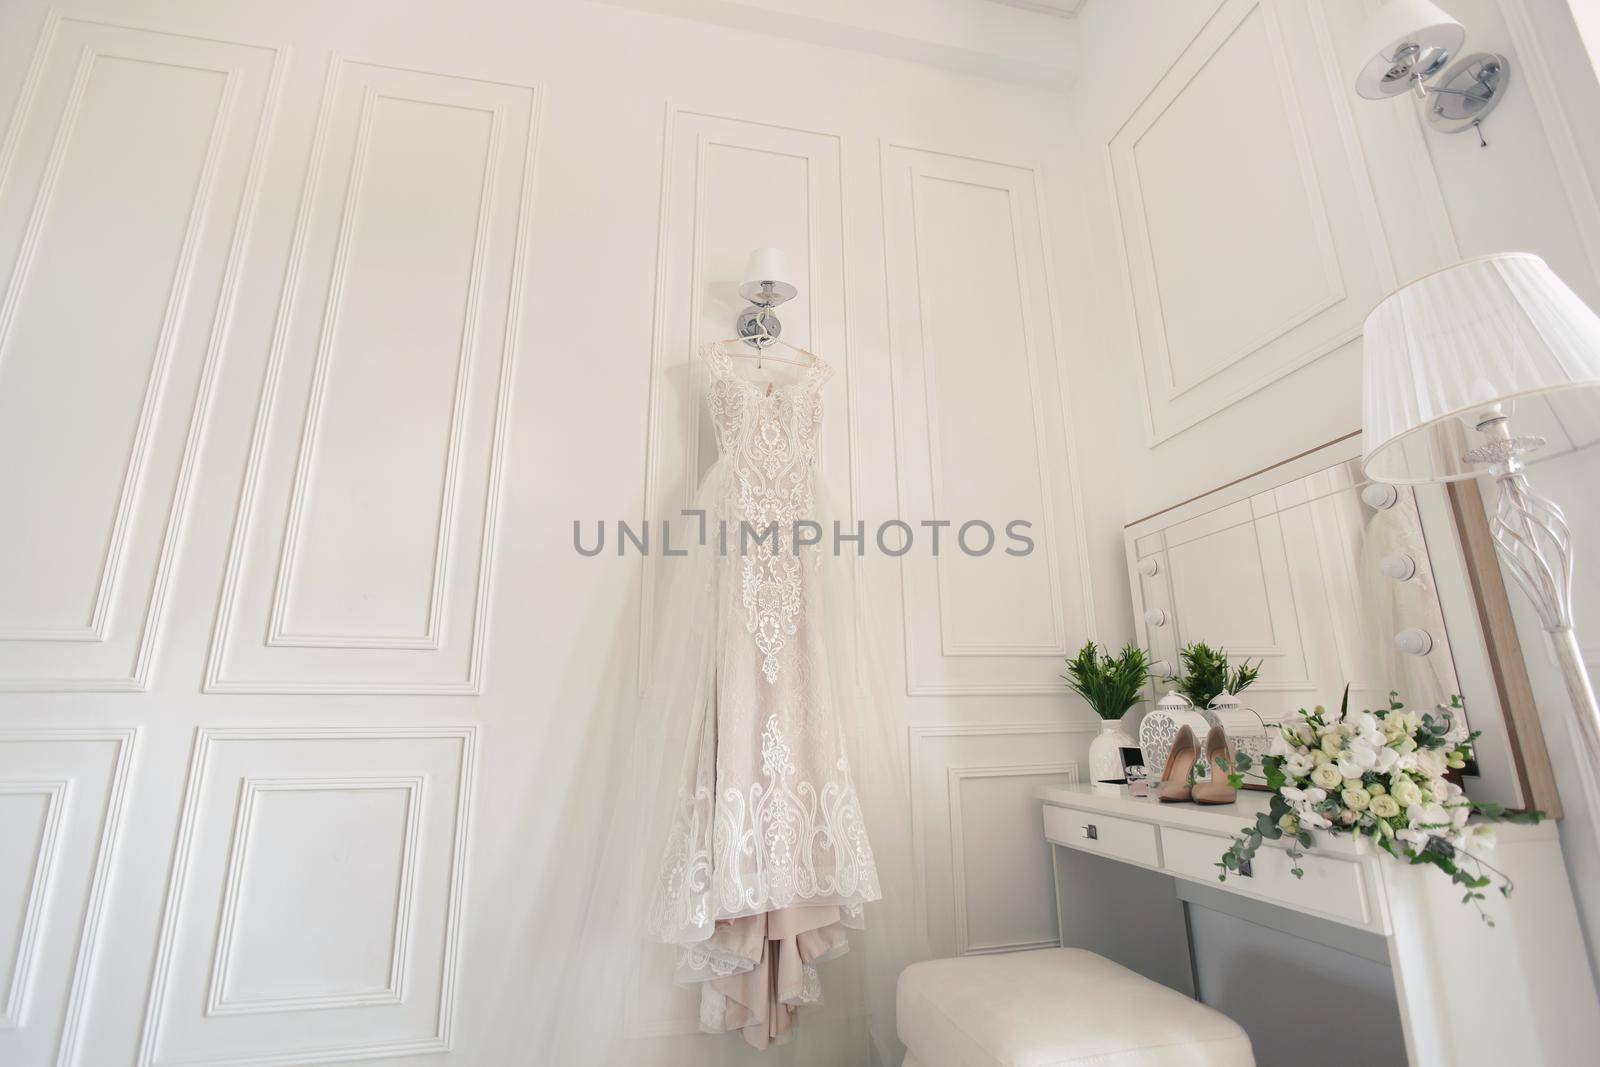 Elegant wedding white dress hanging on a wall during a wedding preparation. Bride's morning. Before ceremony